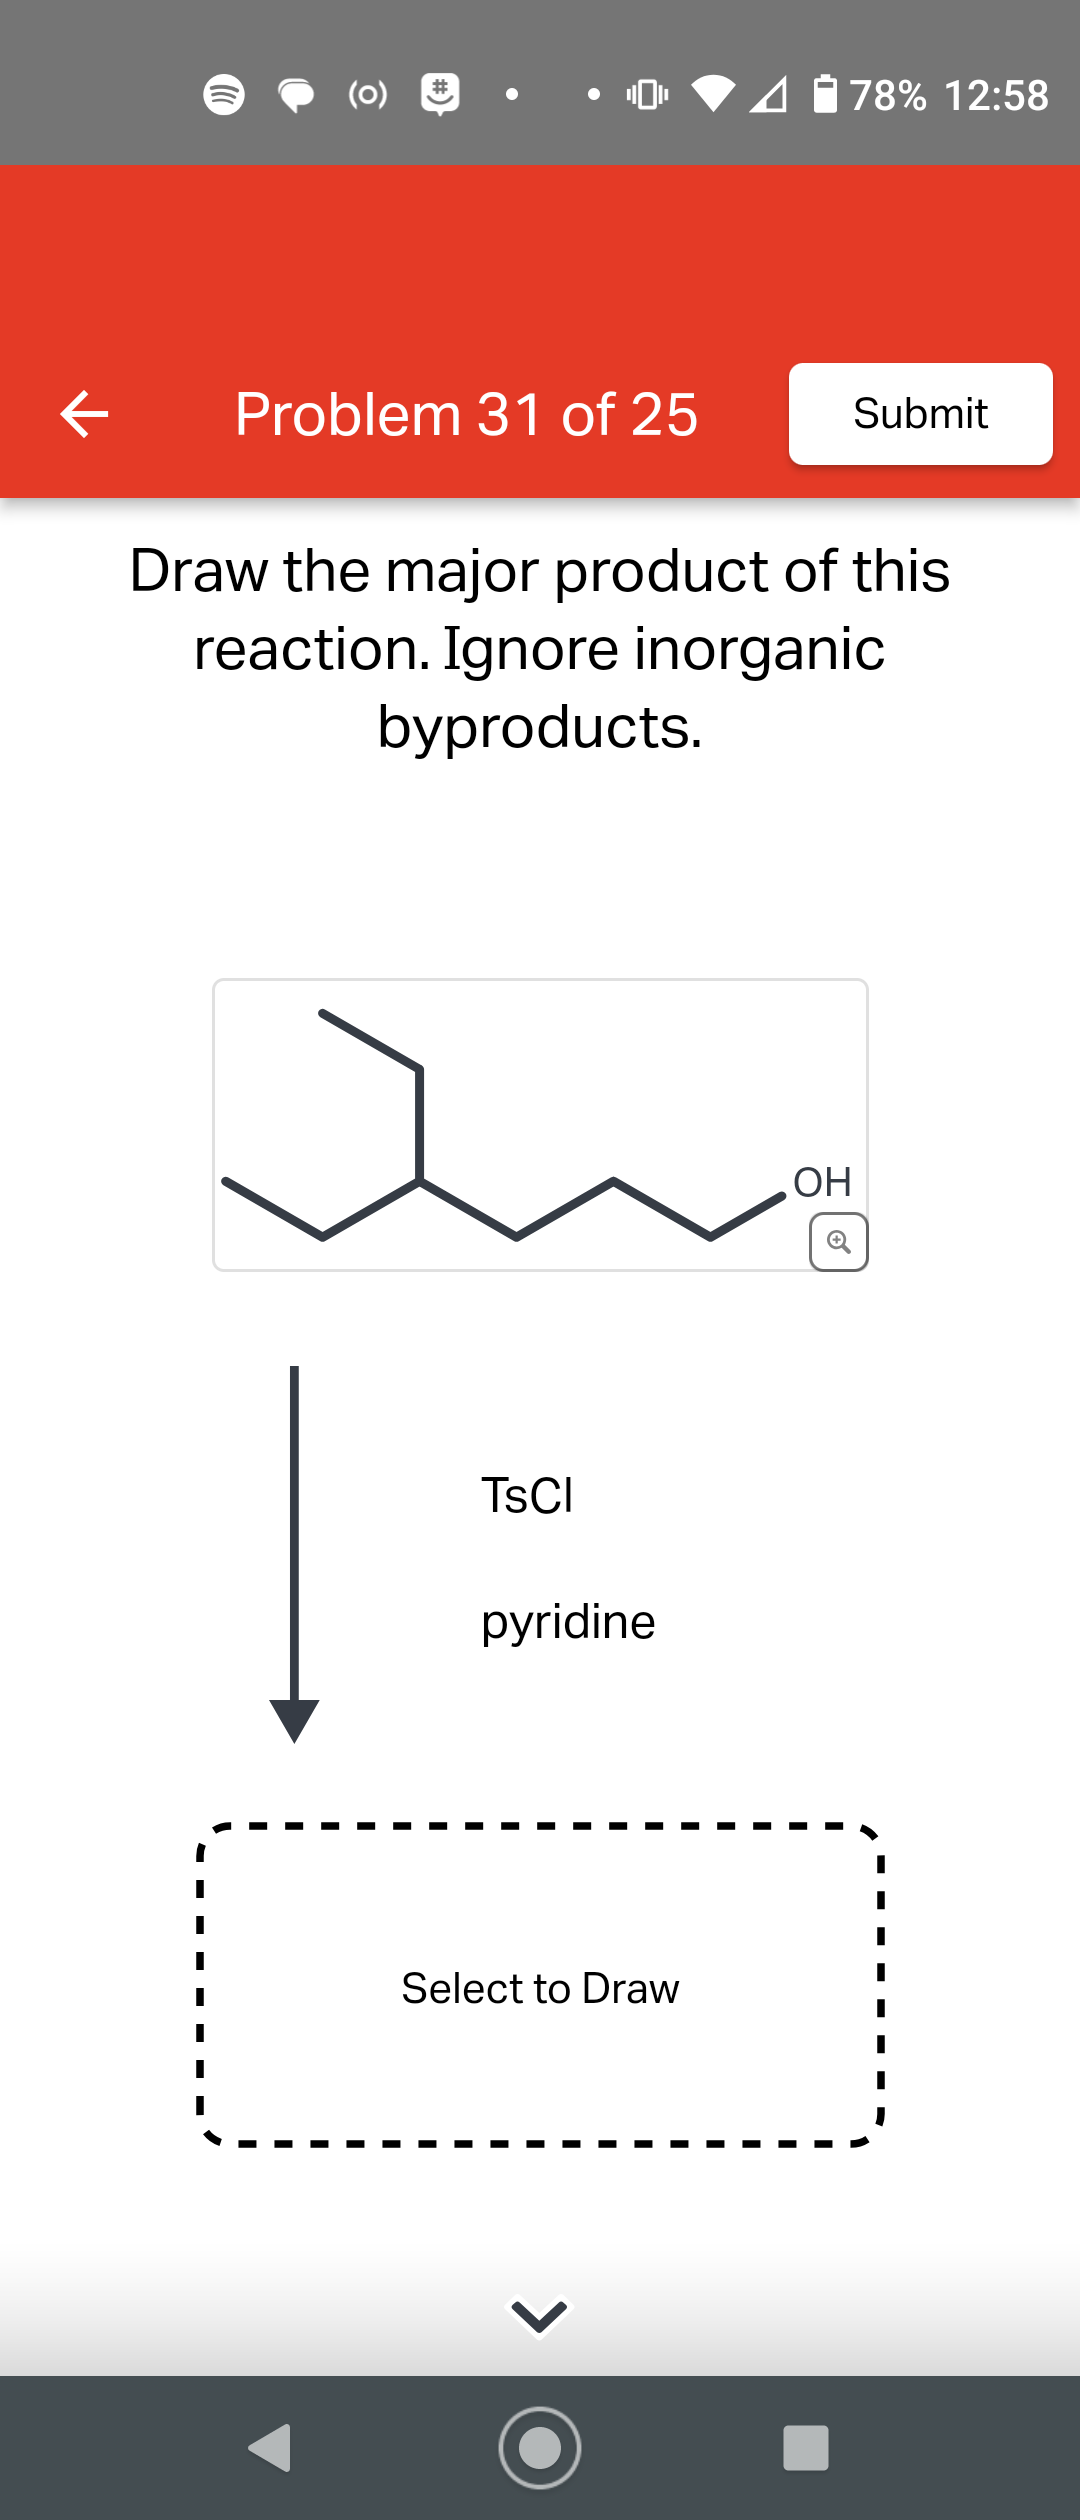 ())))
(0)
Problem 31 of 25
TSCI
Draw the major product of this
reaction. Ignore inorganic
byproducts.
pyridine
78% 12:58
Select to Draw
Submit
ОН
Q